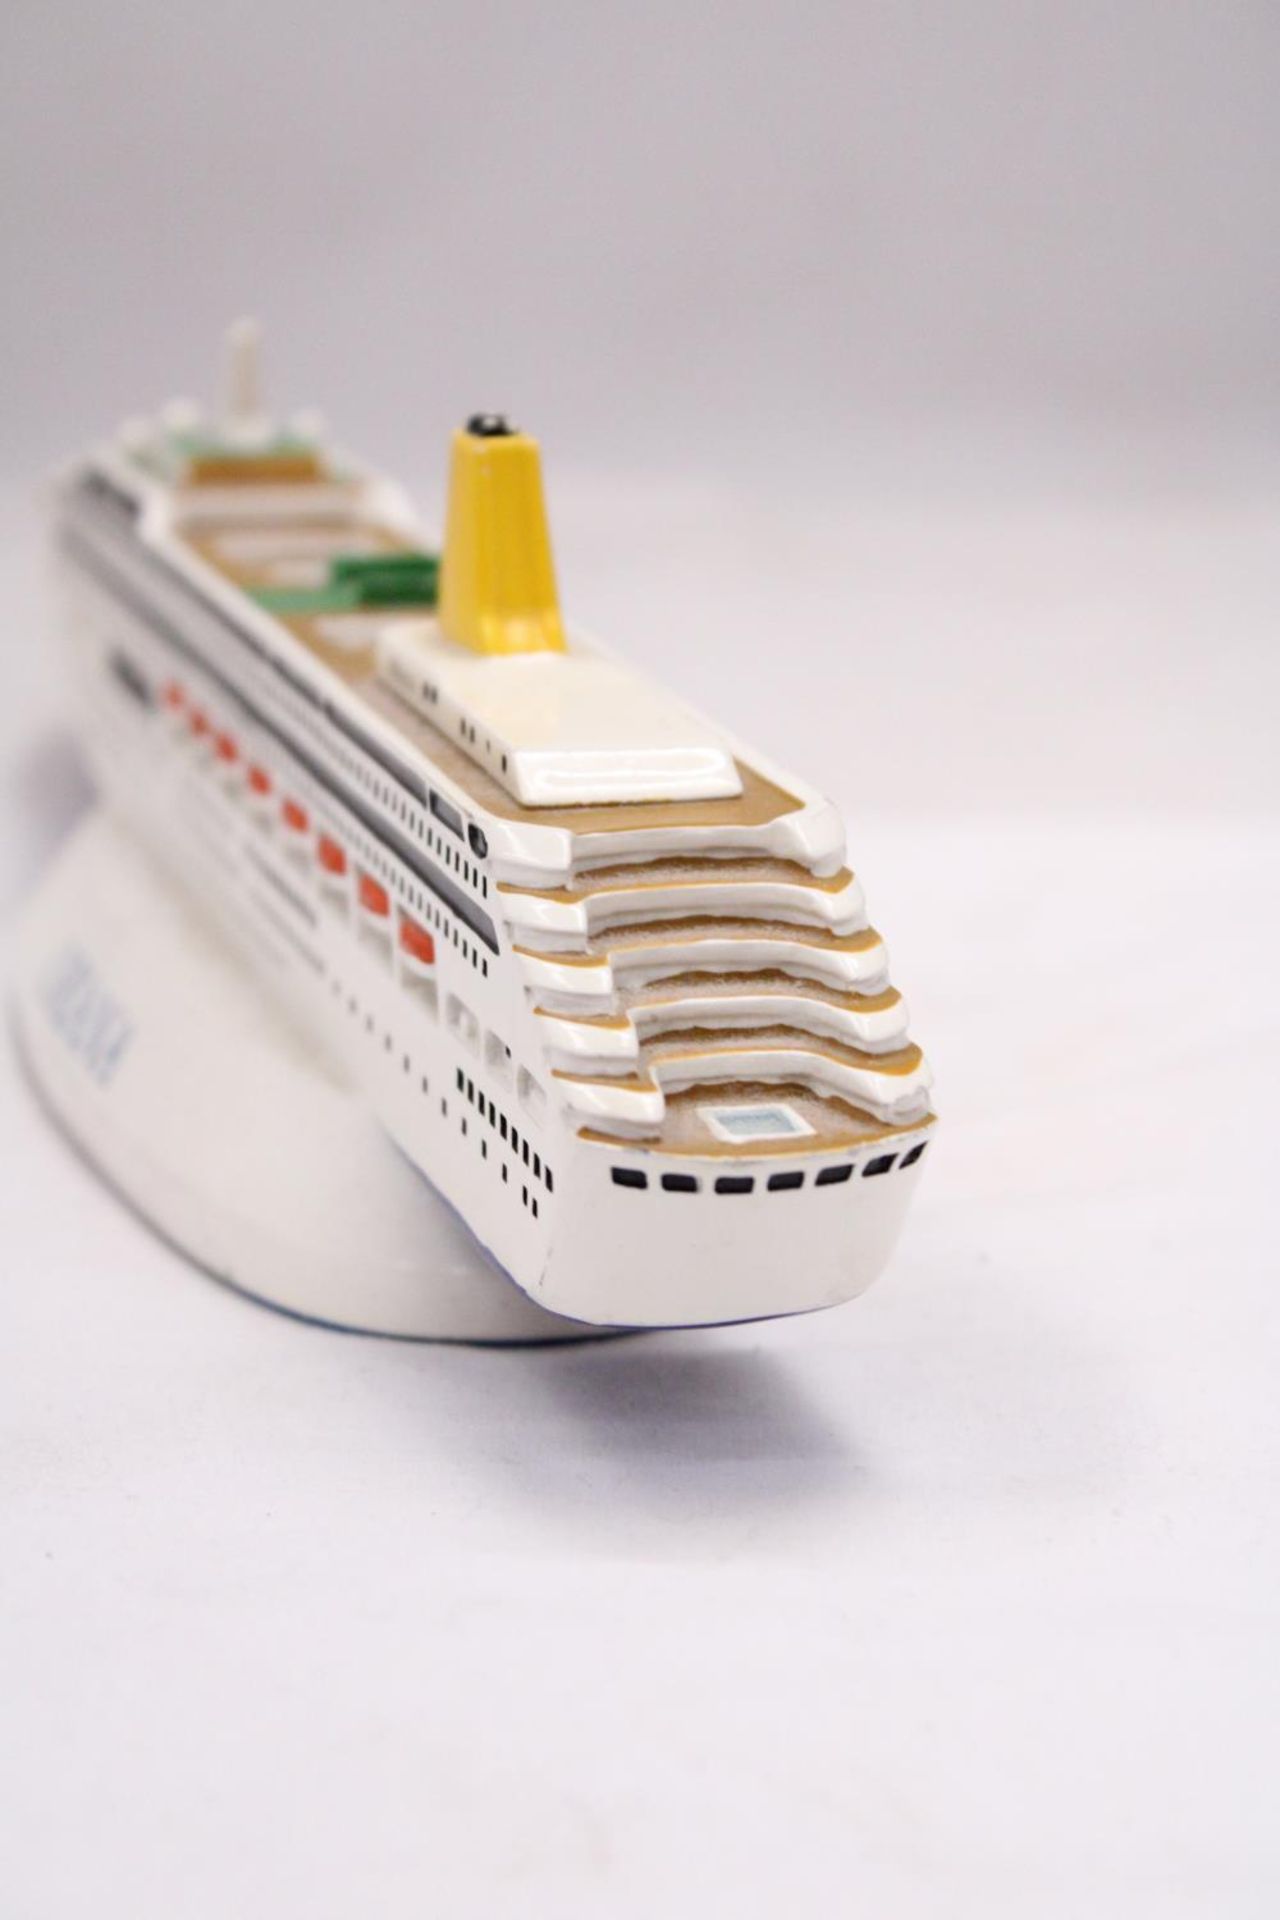 A HEAVY, SOLID, OCEAN LINER ON A STAND, 'ORIANA', LENGTH 30CM, HEIGHT 6CM - Image 4 of 5